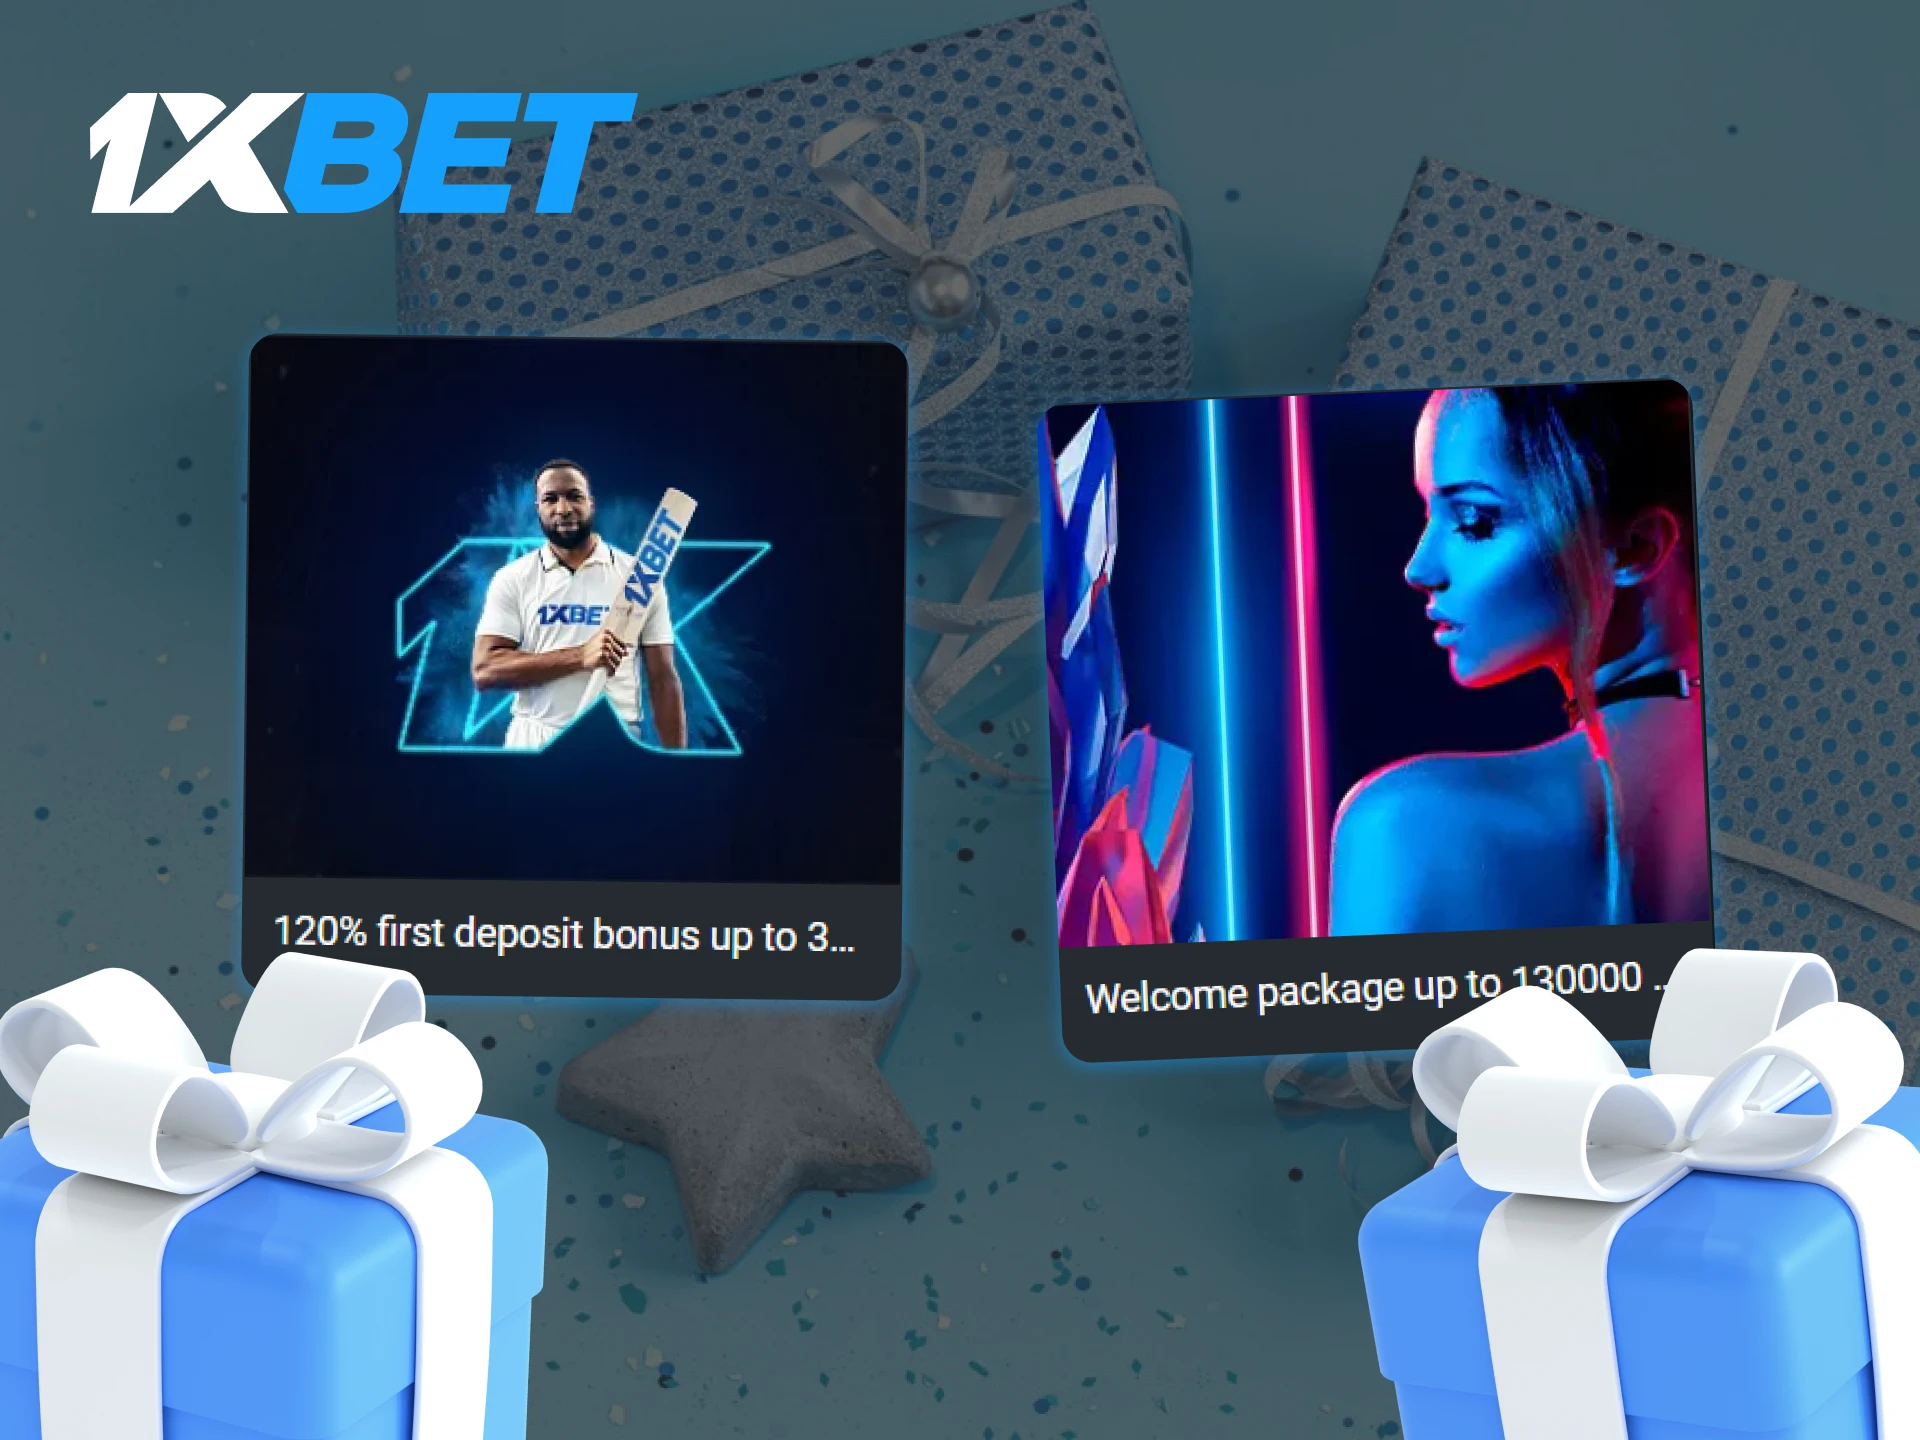 1xBet offers a nice sports and casino welcome bonuses.